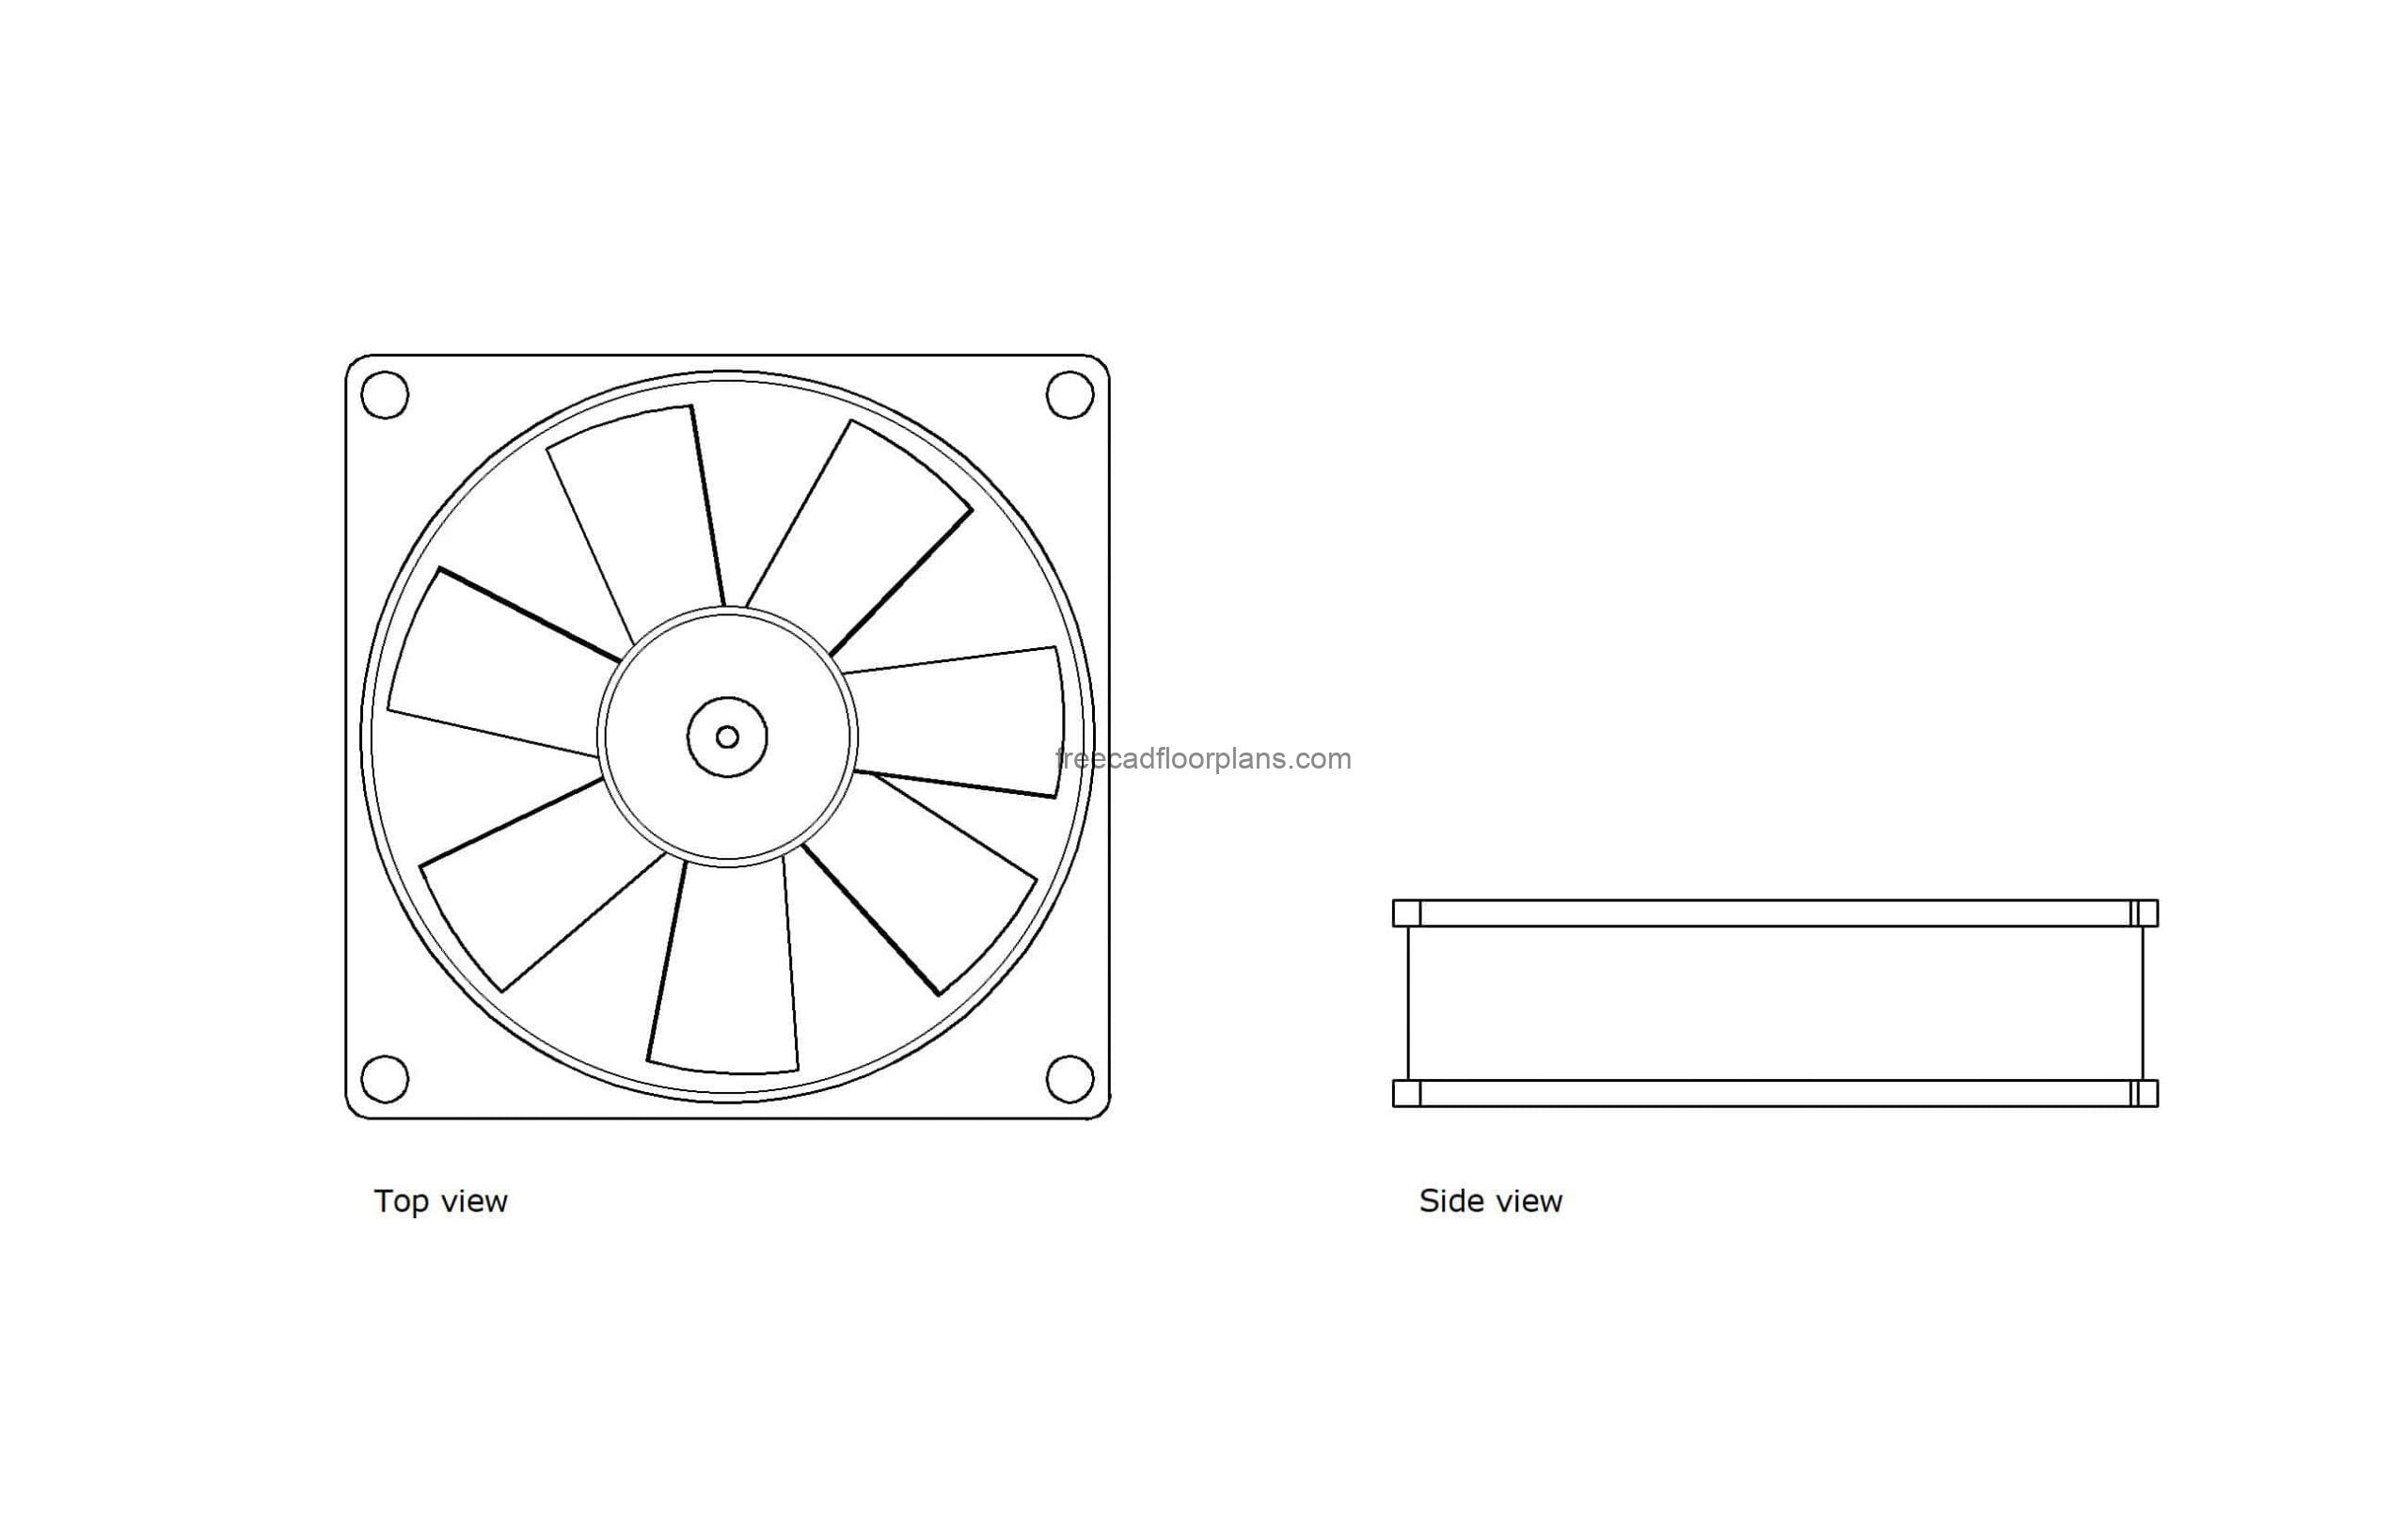 autocad drawing of computer fan, 2d views, plan and elevation, dwg file free for download